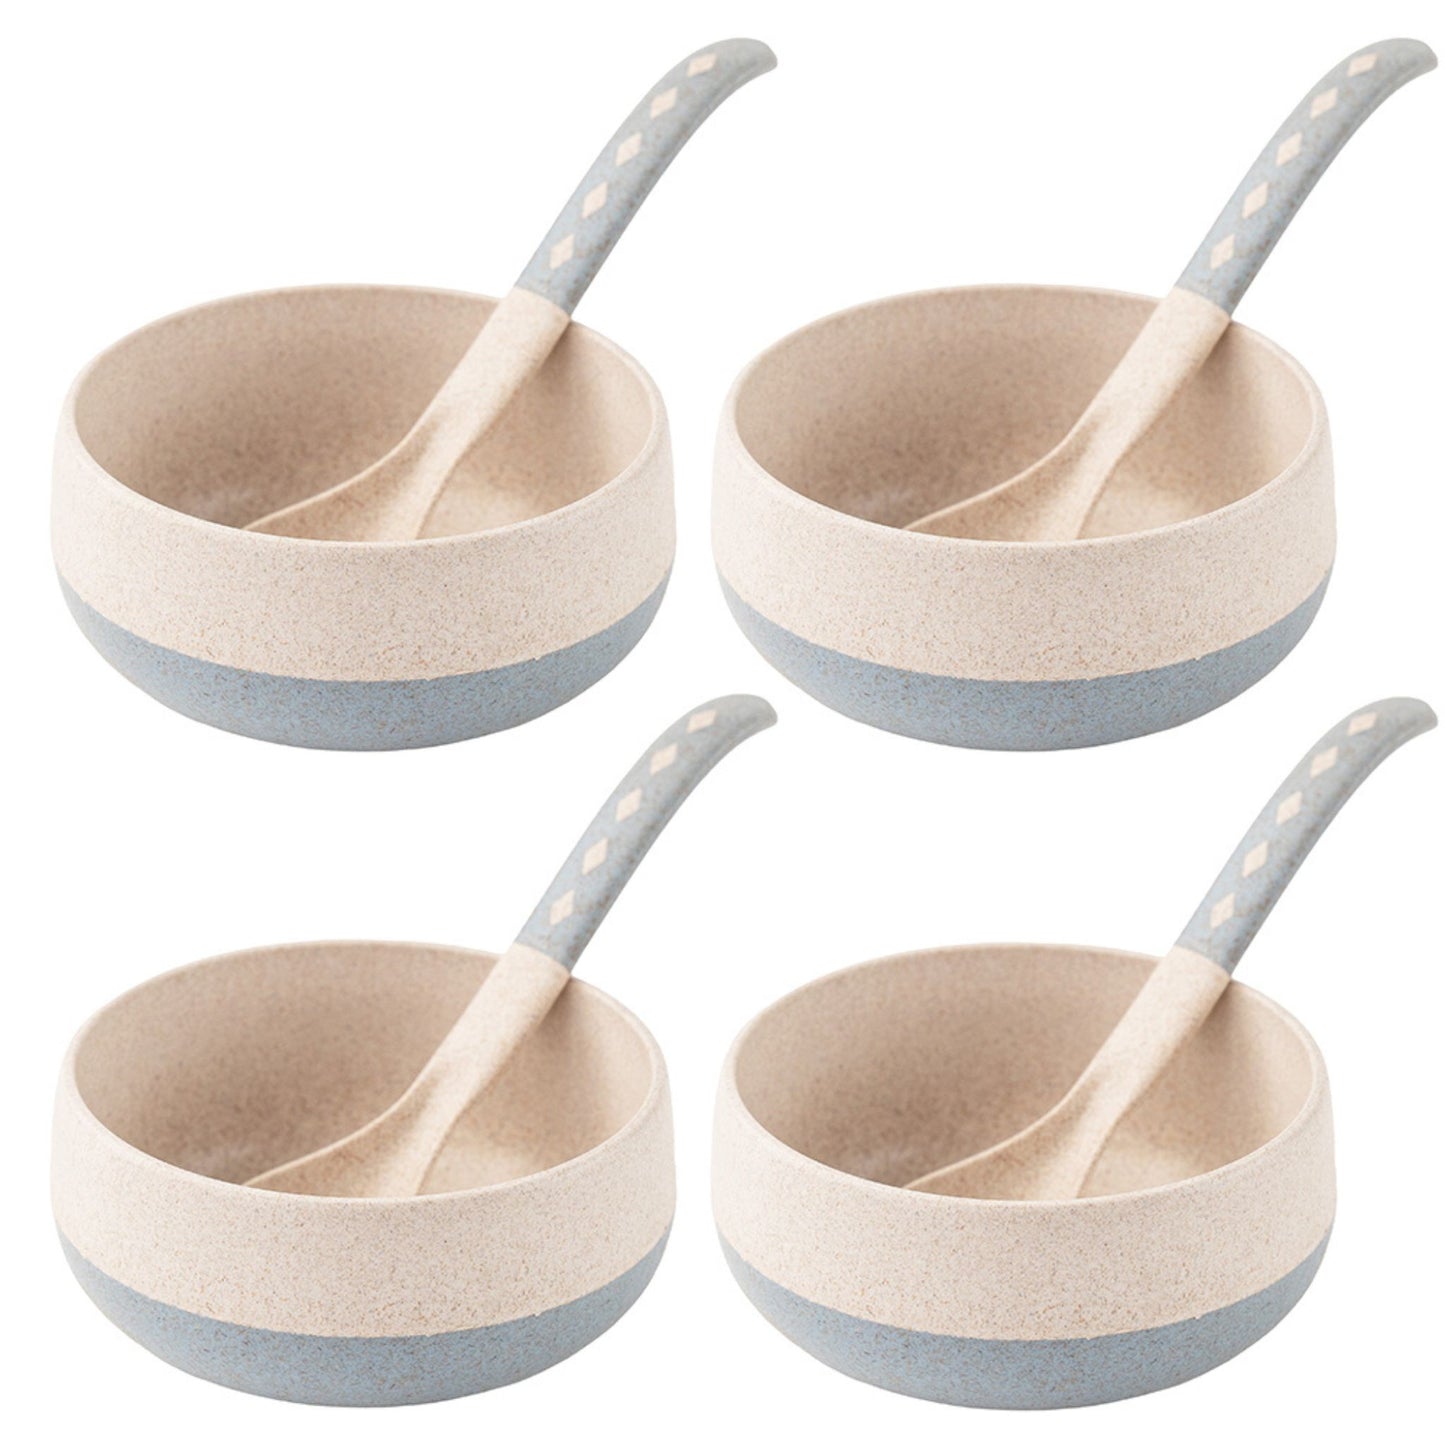 RICE HUSK ROUND BOWLS WITH SPOON - 250ML SET OF 4